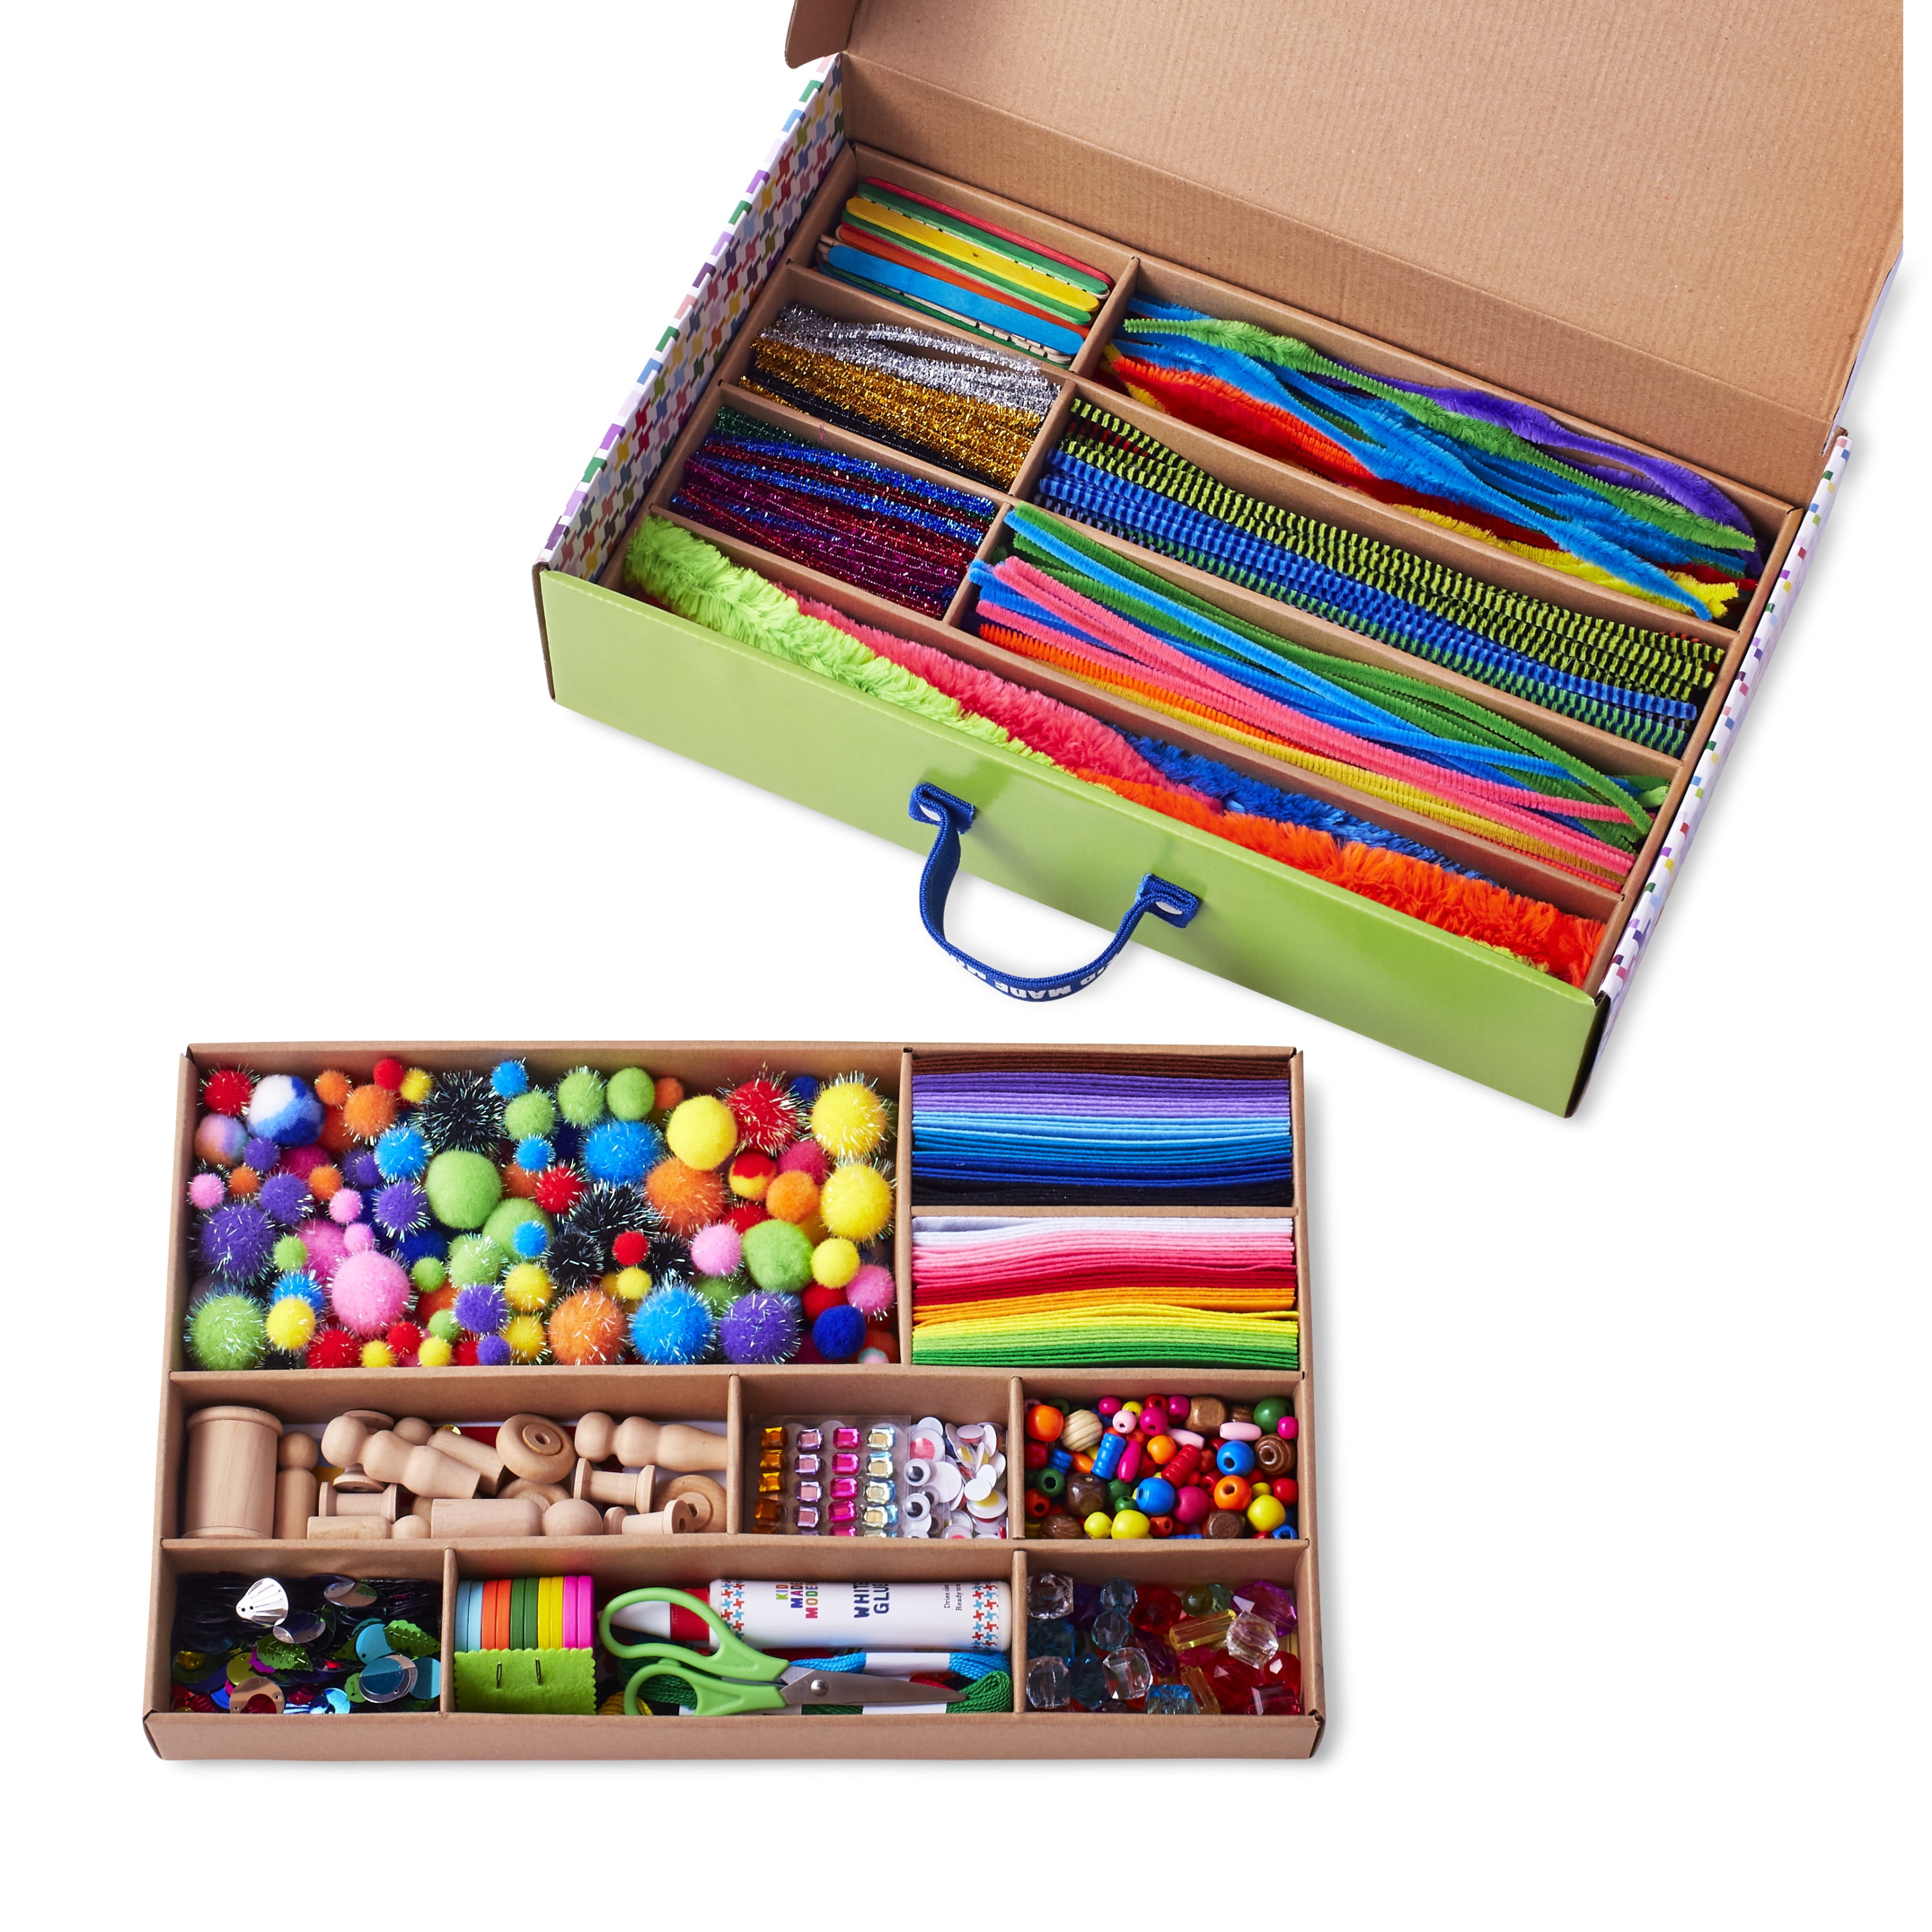 Arts and Crafts Library Set  Arts and crafts, Art and craft materials, Art  kit